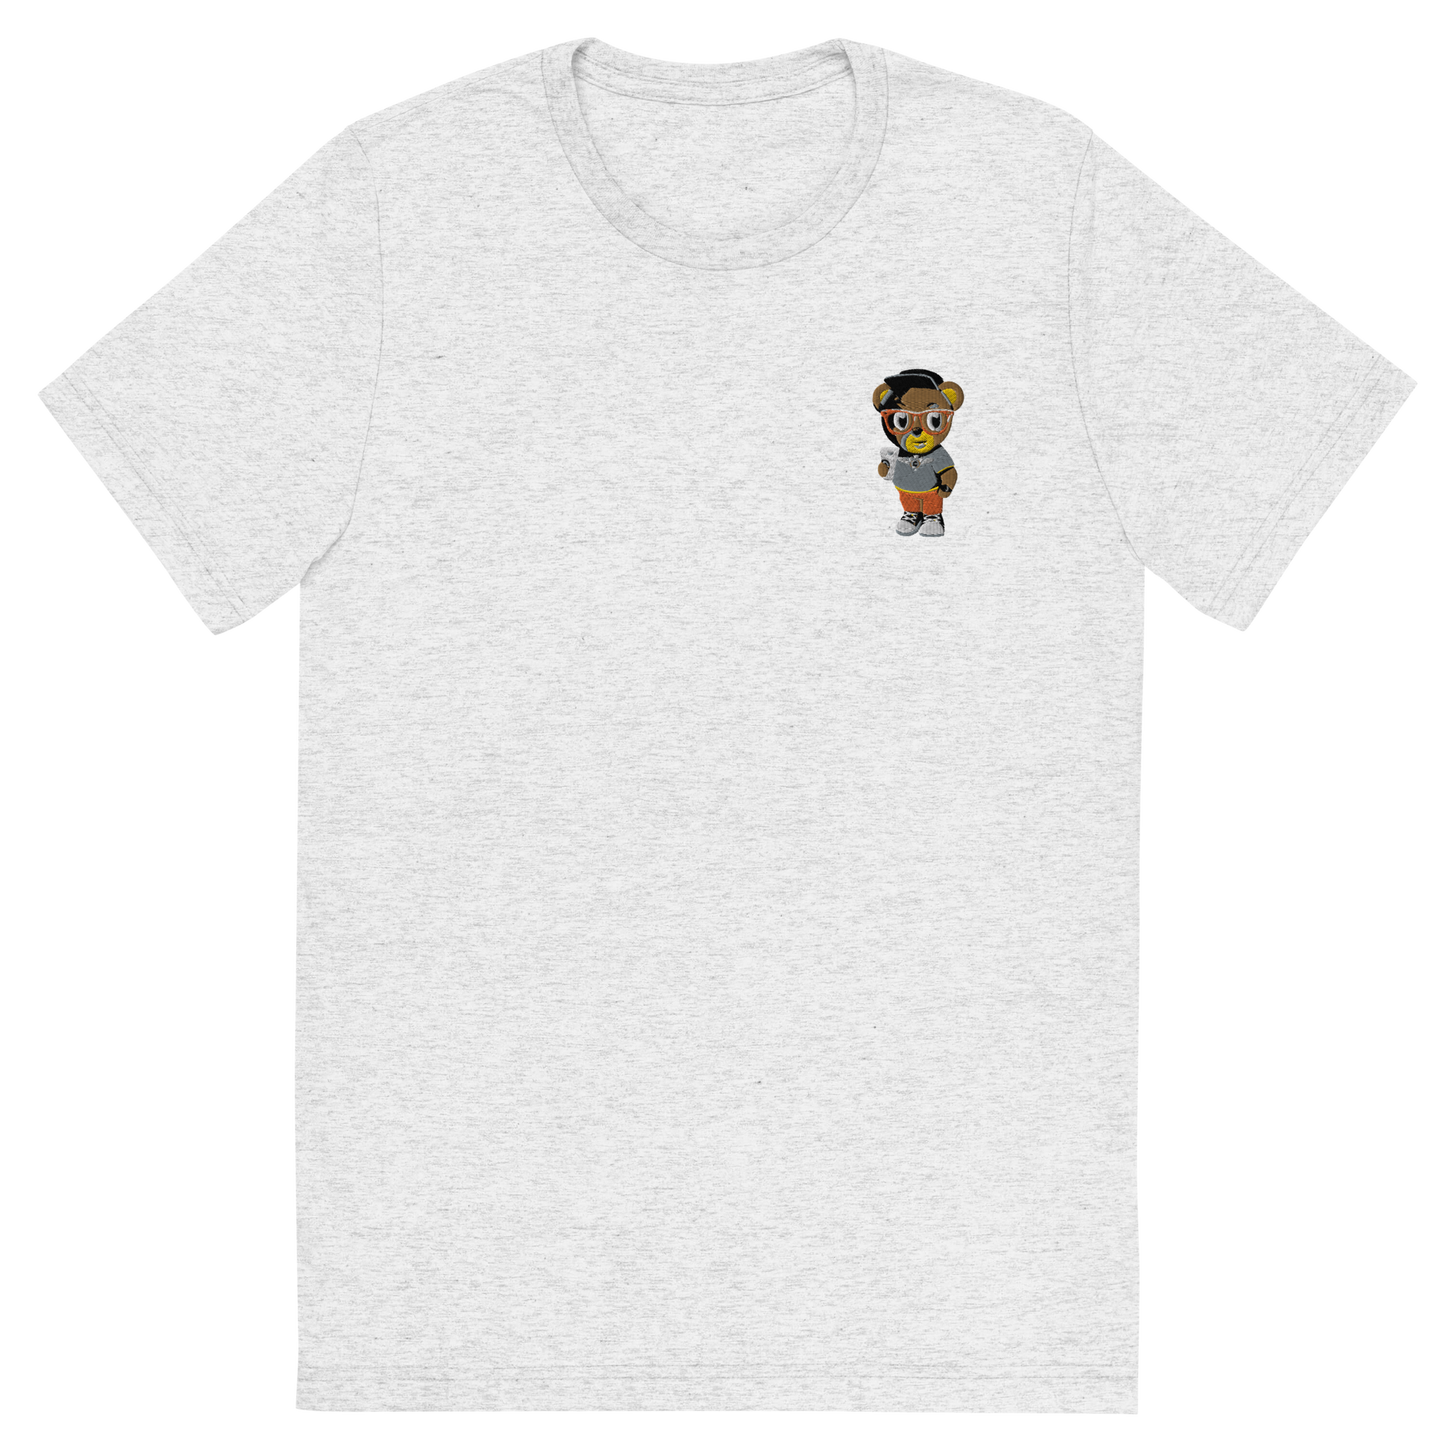 Pook The Bear t-shirt (Embroidered)